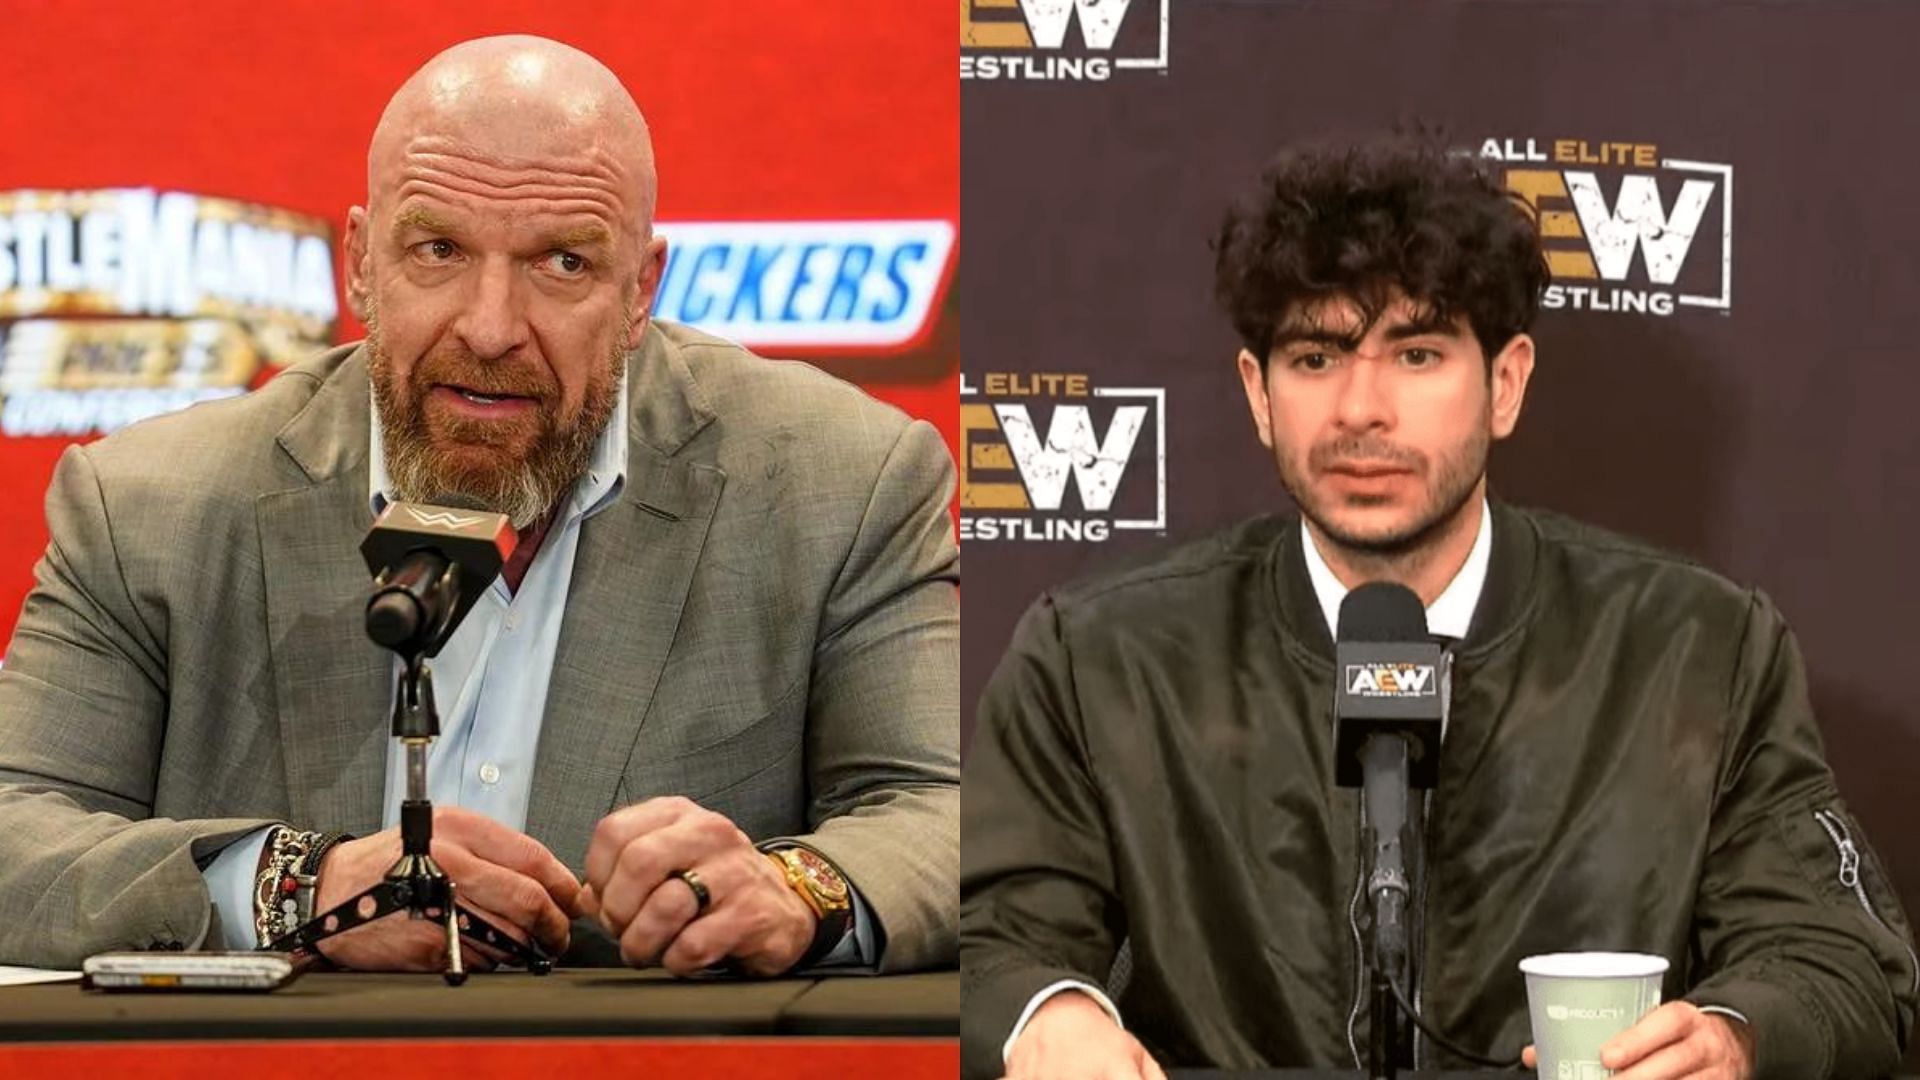 Triple H and Tony Khan are key figures in WWE and AEW respectively